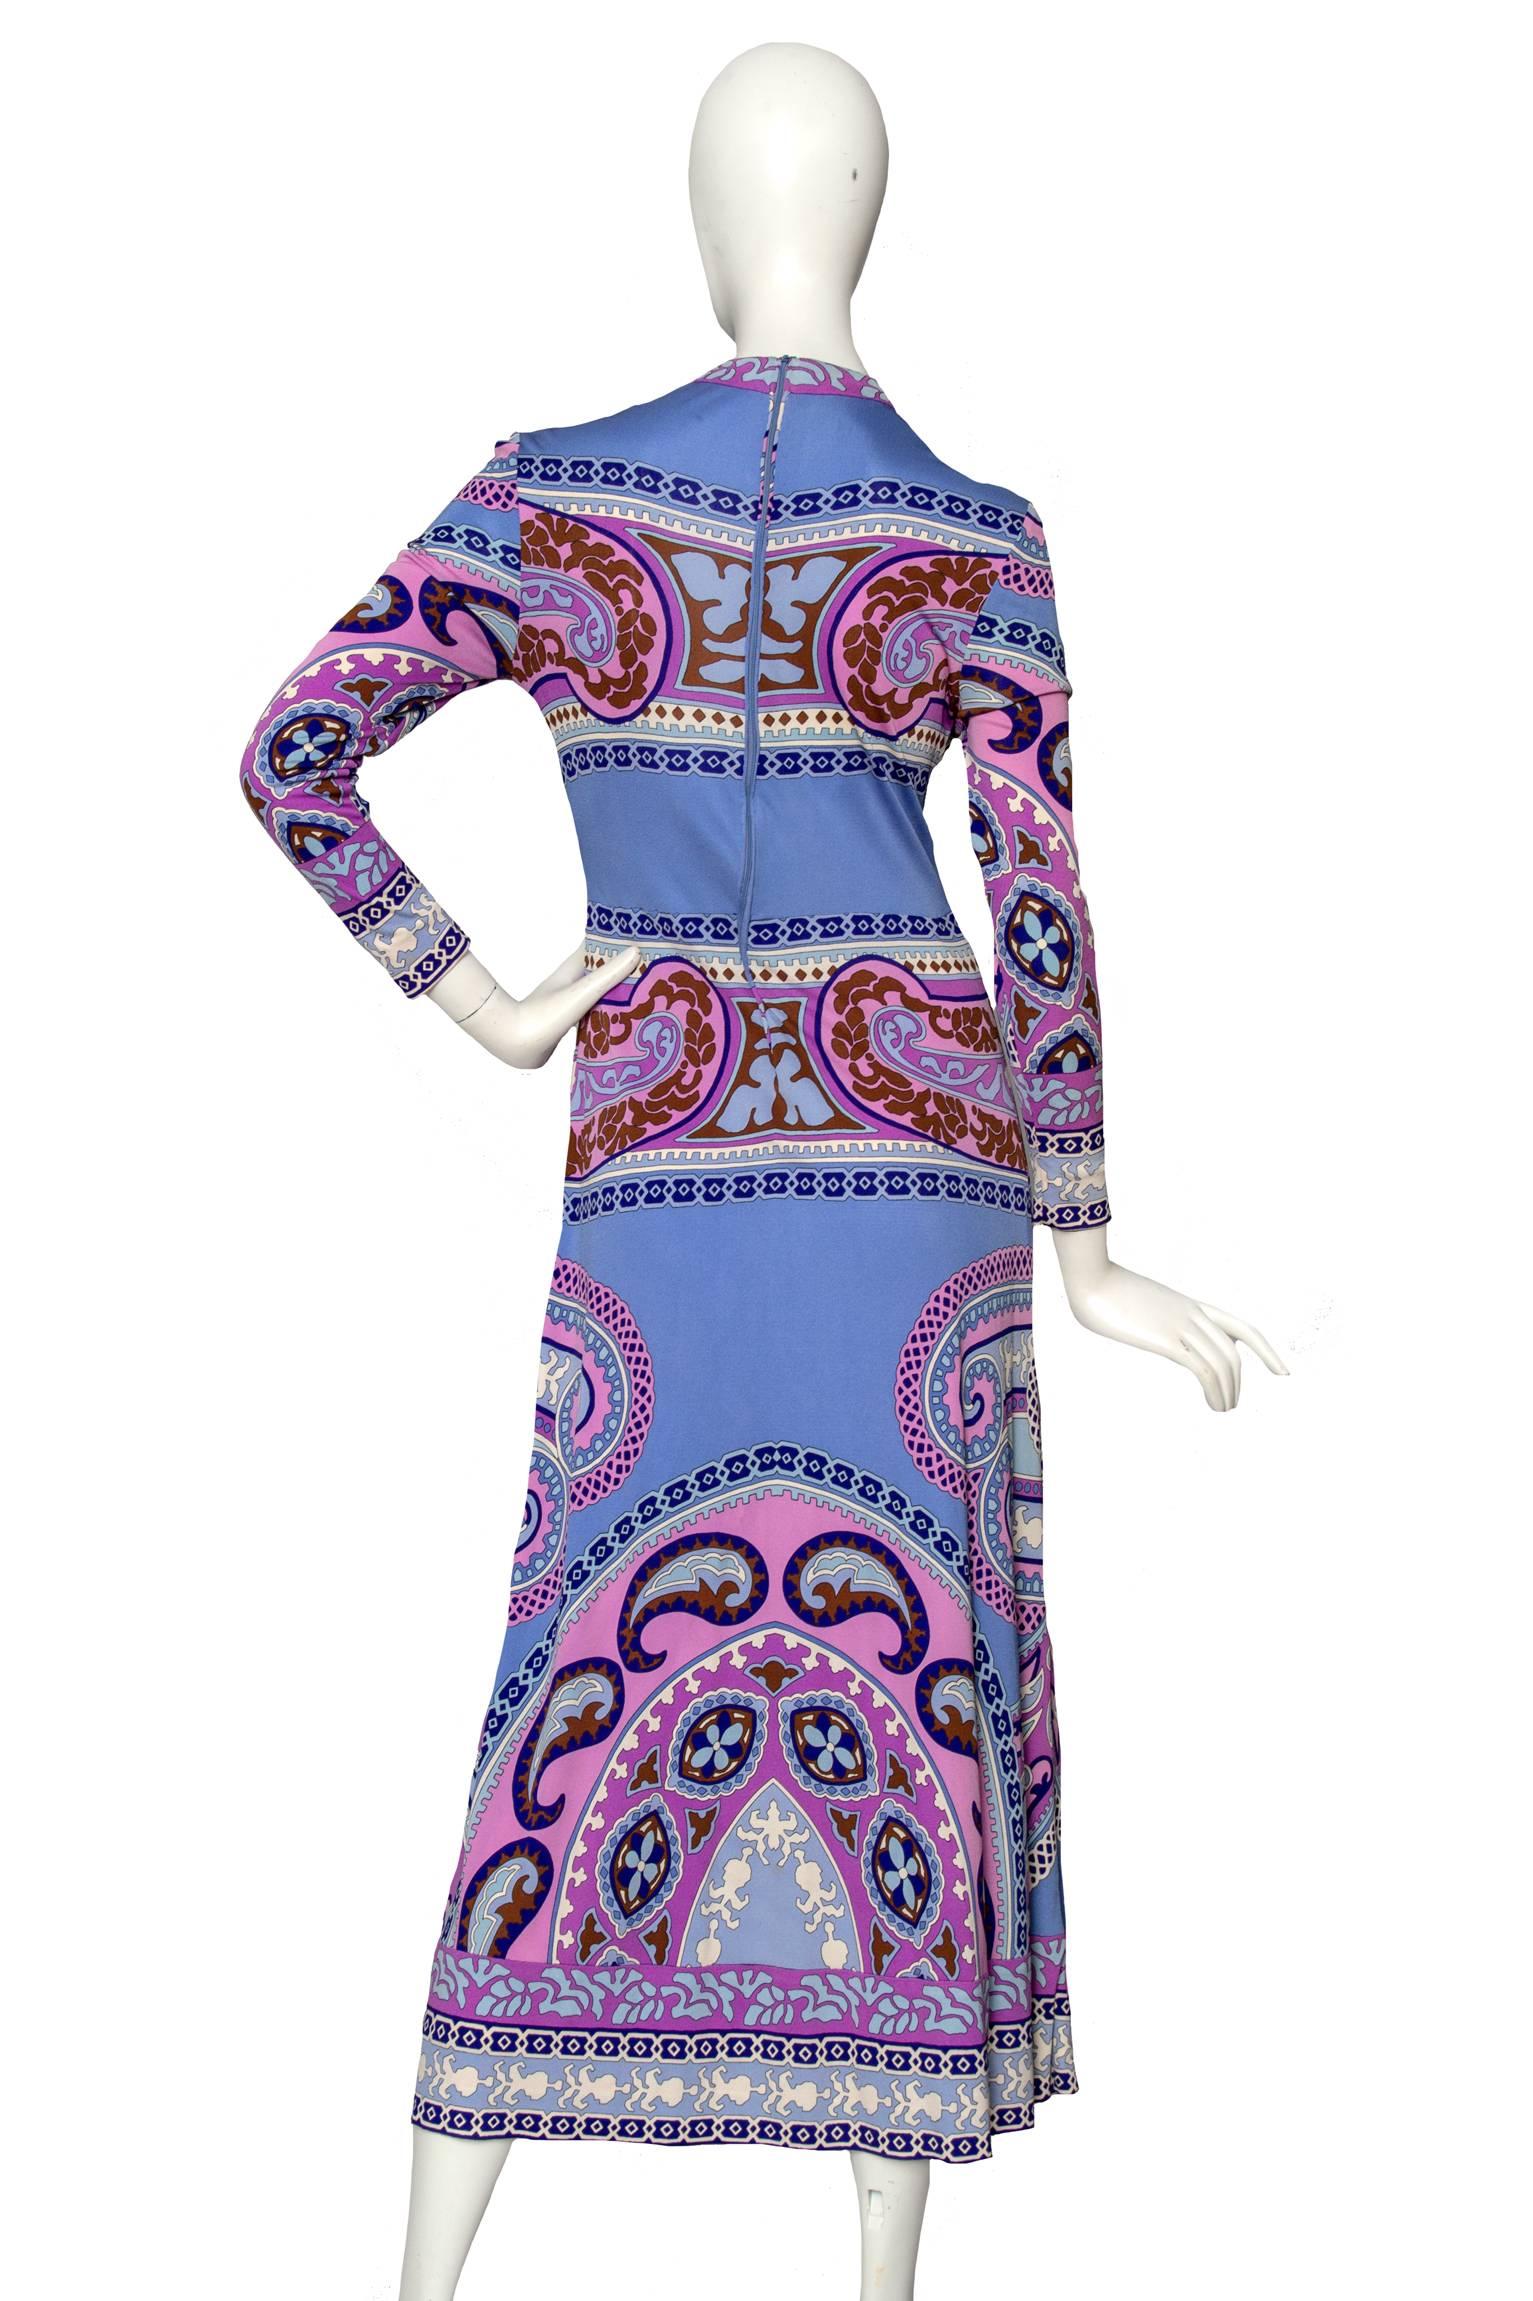 A stunning 1970s unlabelled Leonard silk jersey midi dress with a pink, blue and brown paisley-inspired print. It has long tapered sleeves and a back zipper closure. 

The size of the dress corresponds to a modern size Small. 